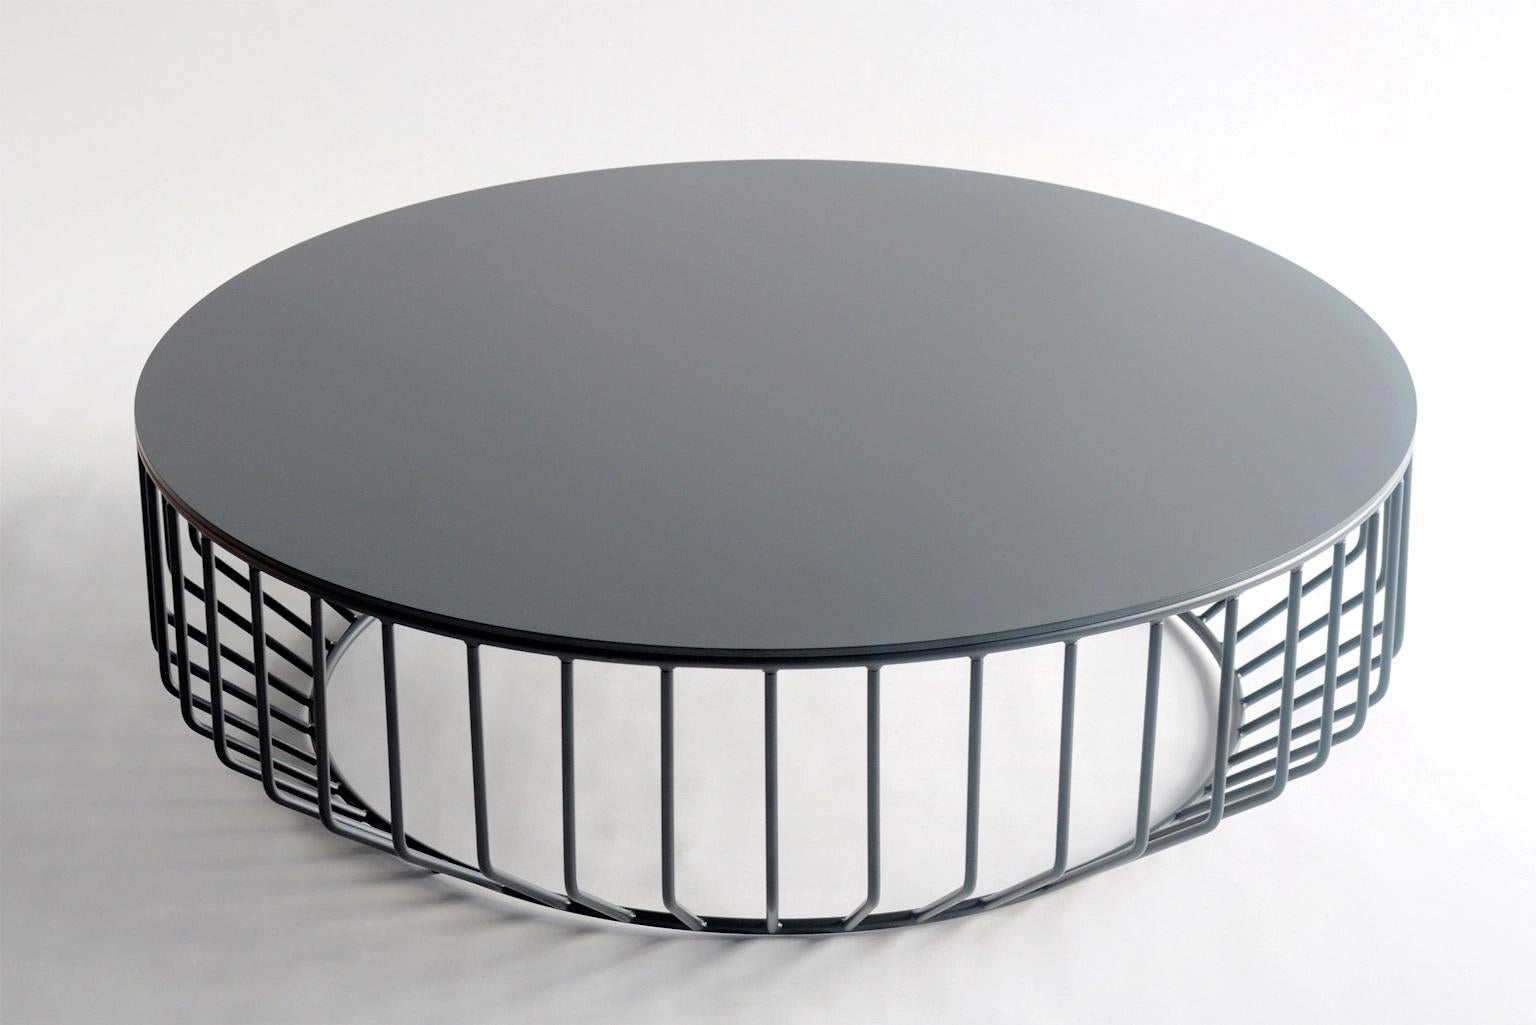 Wired Large Coffee Table by Phase Design
Dimensions: Ø 106.7 x H 33 cm. 
Materials: Powder-coated metal.

Solid steel bar and round plate. Steel available in gloss or flat white, black, gray, or yellow powder coat. Powder coat finishes also